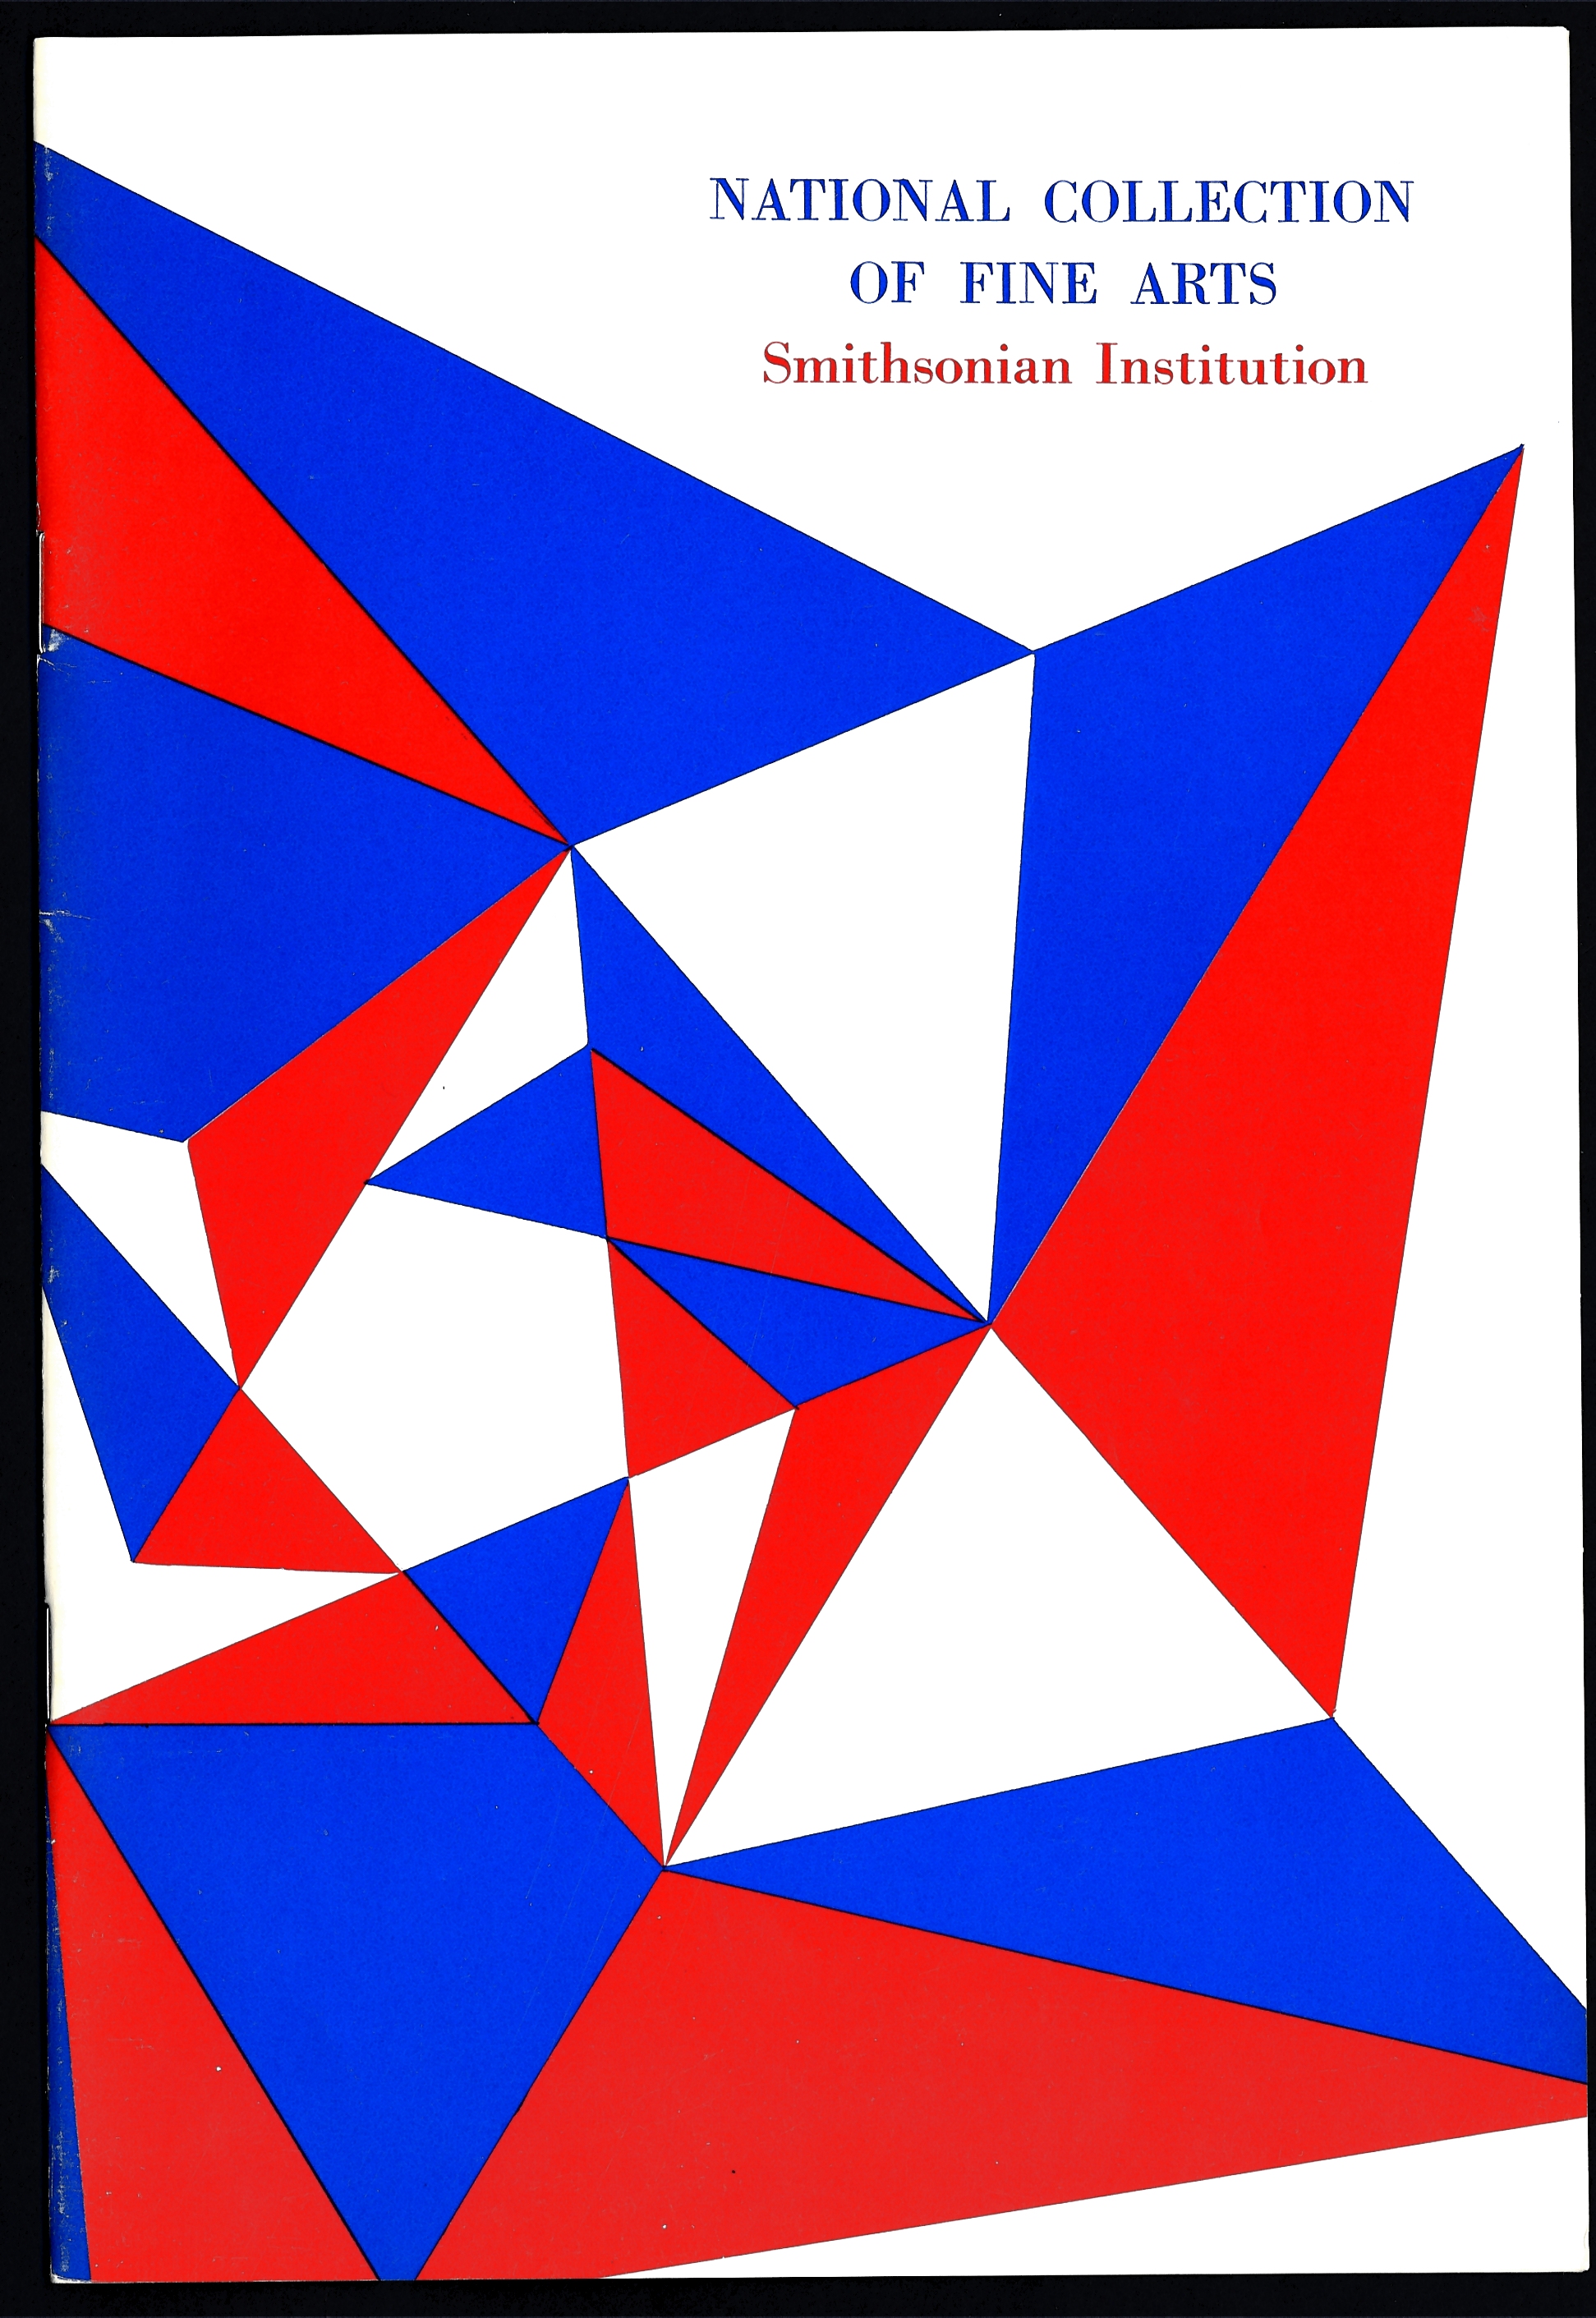 120th Anniversary brochure for the National Collection of Fine Arts (now the Smithsonian American Art Museum), 1966.